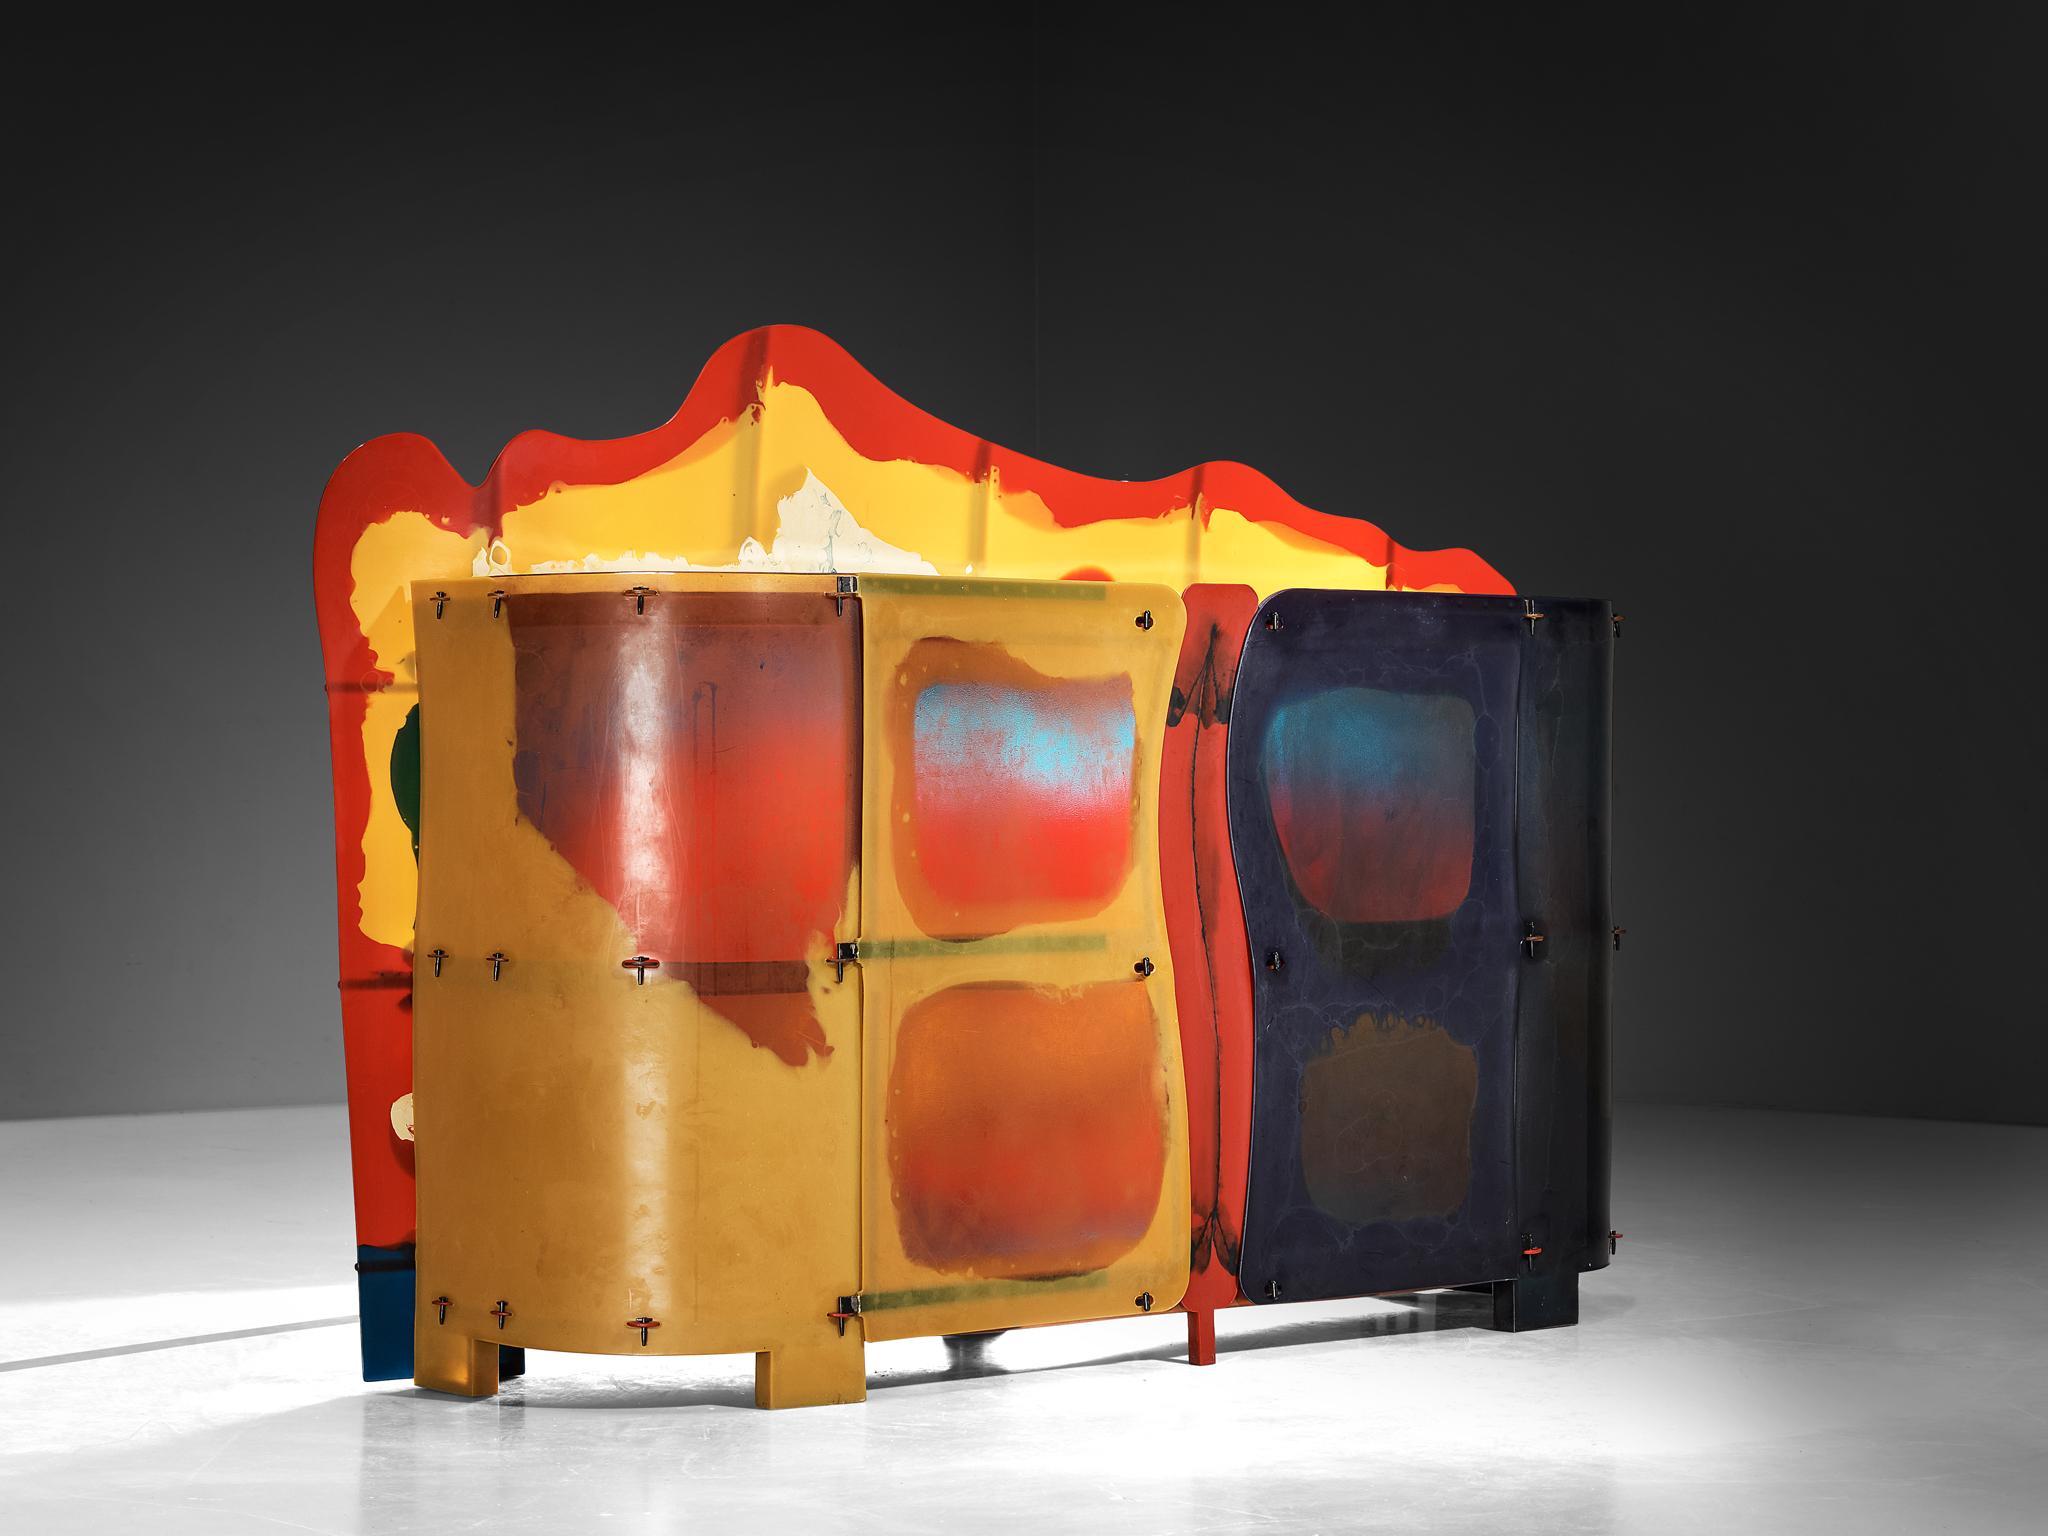 Gaetano Pesce for Zerodisegno, sideboard from the 'Nobody's Perfect' series, polyurethane resin, Italy, 2007

Gaetano Pesce has been pioneering a design approach that embraces the unpredictable, creating space for unique pieces within a larger